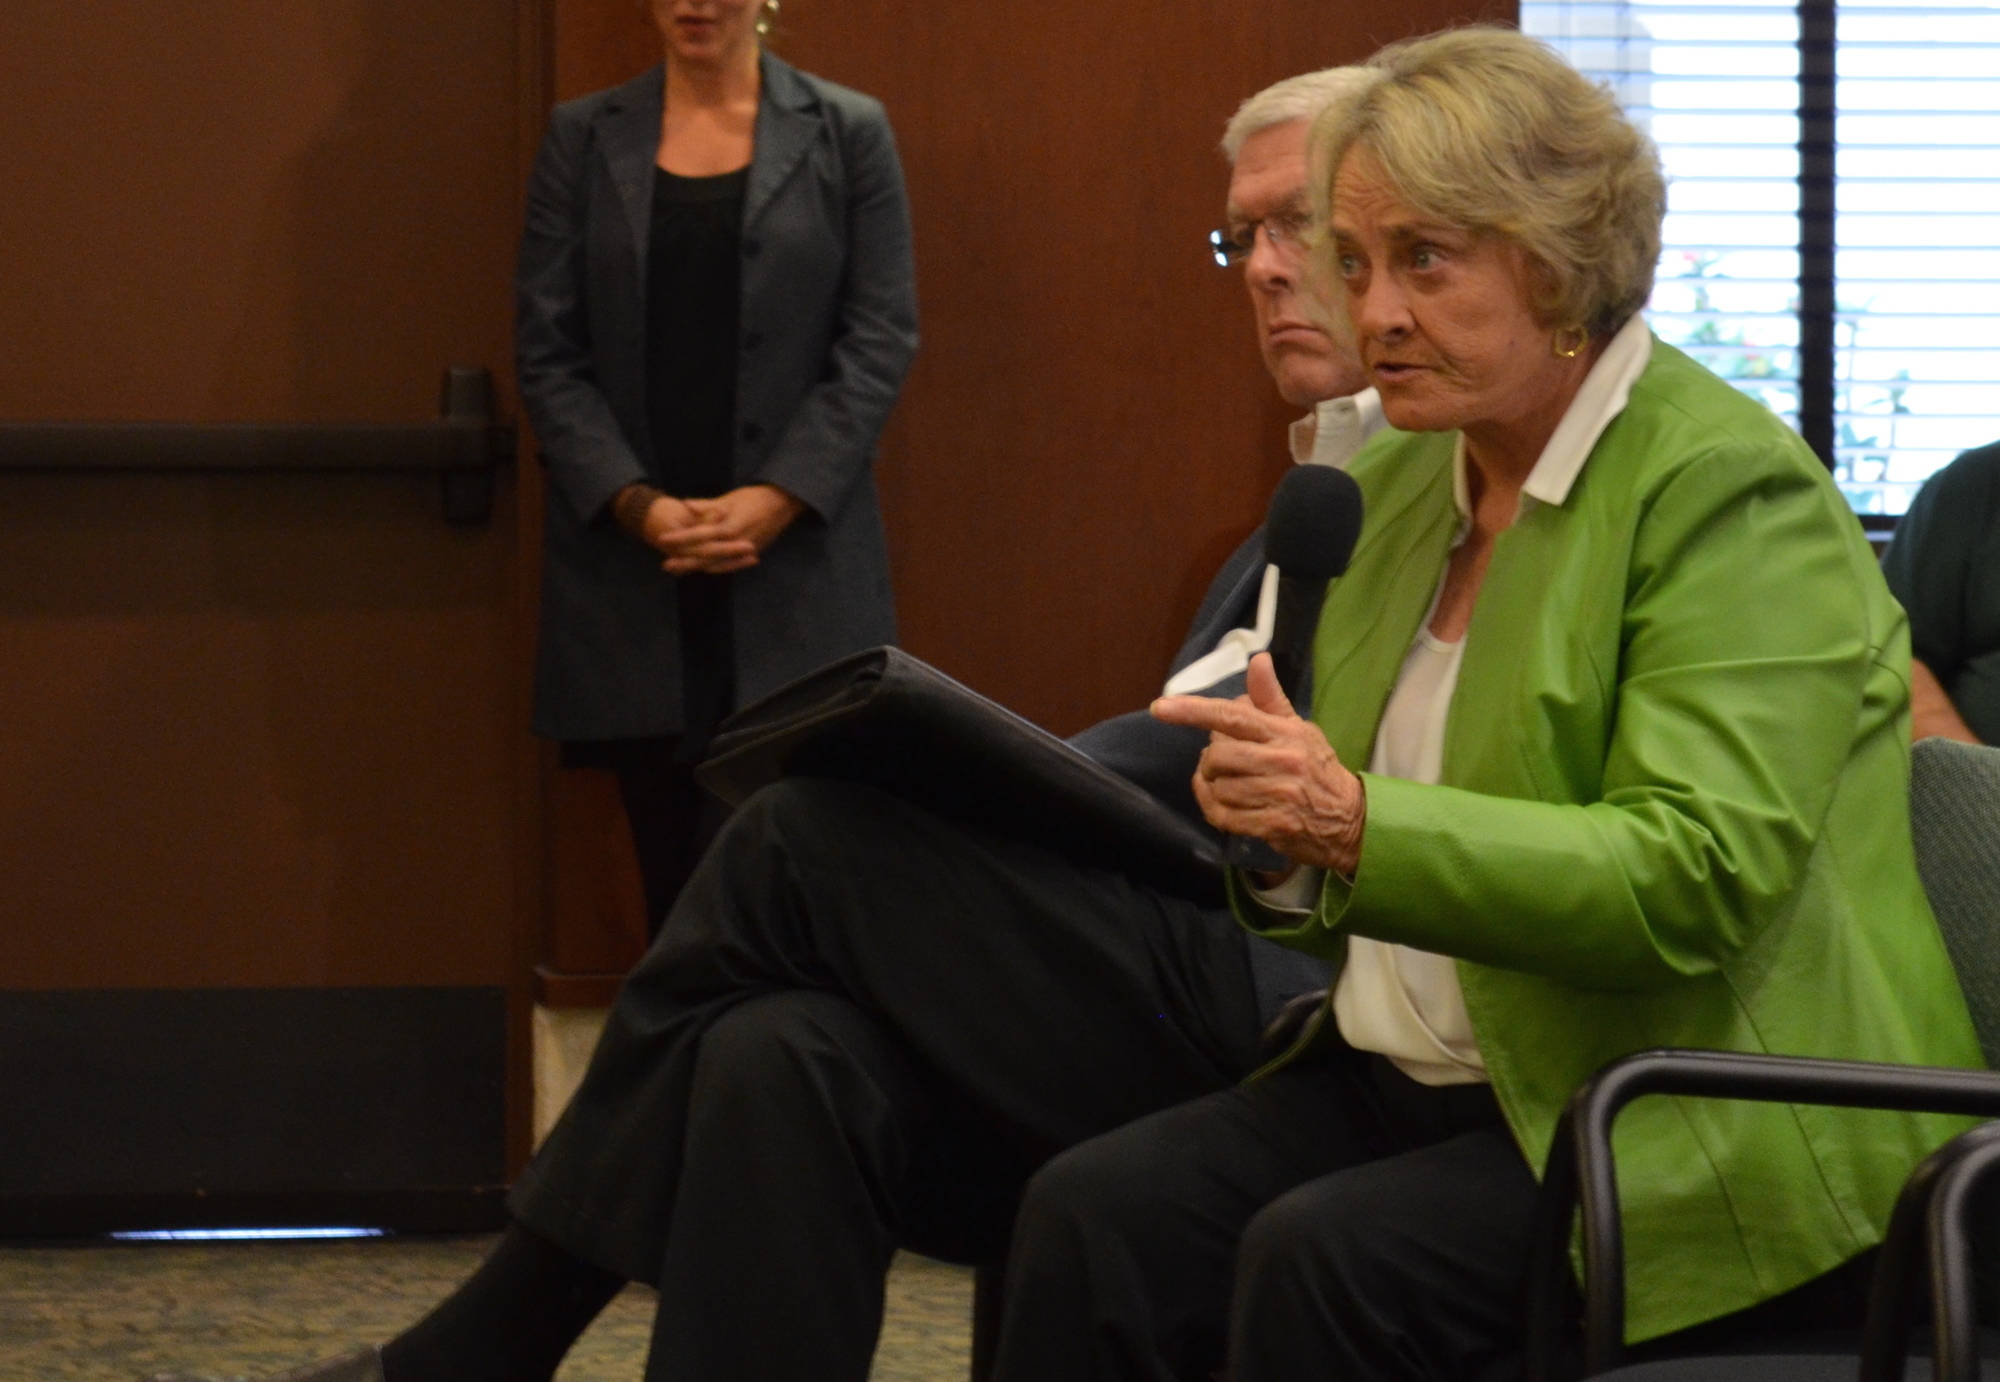 State Sen. Nancy Detert was among the economic development stakeholders present at today’s press conference.